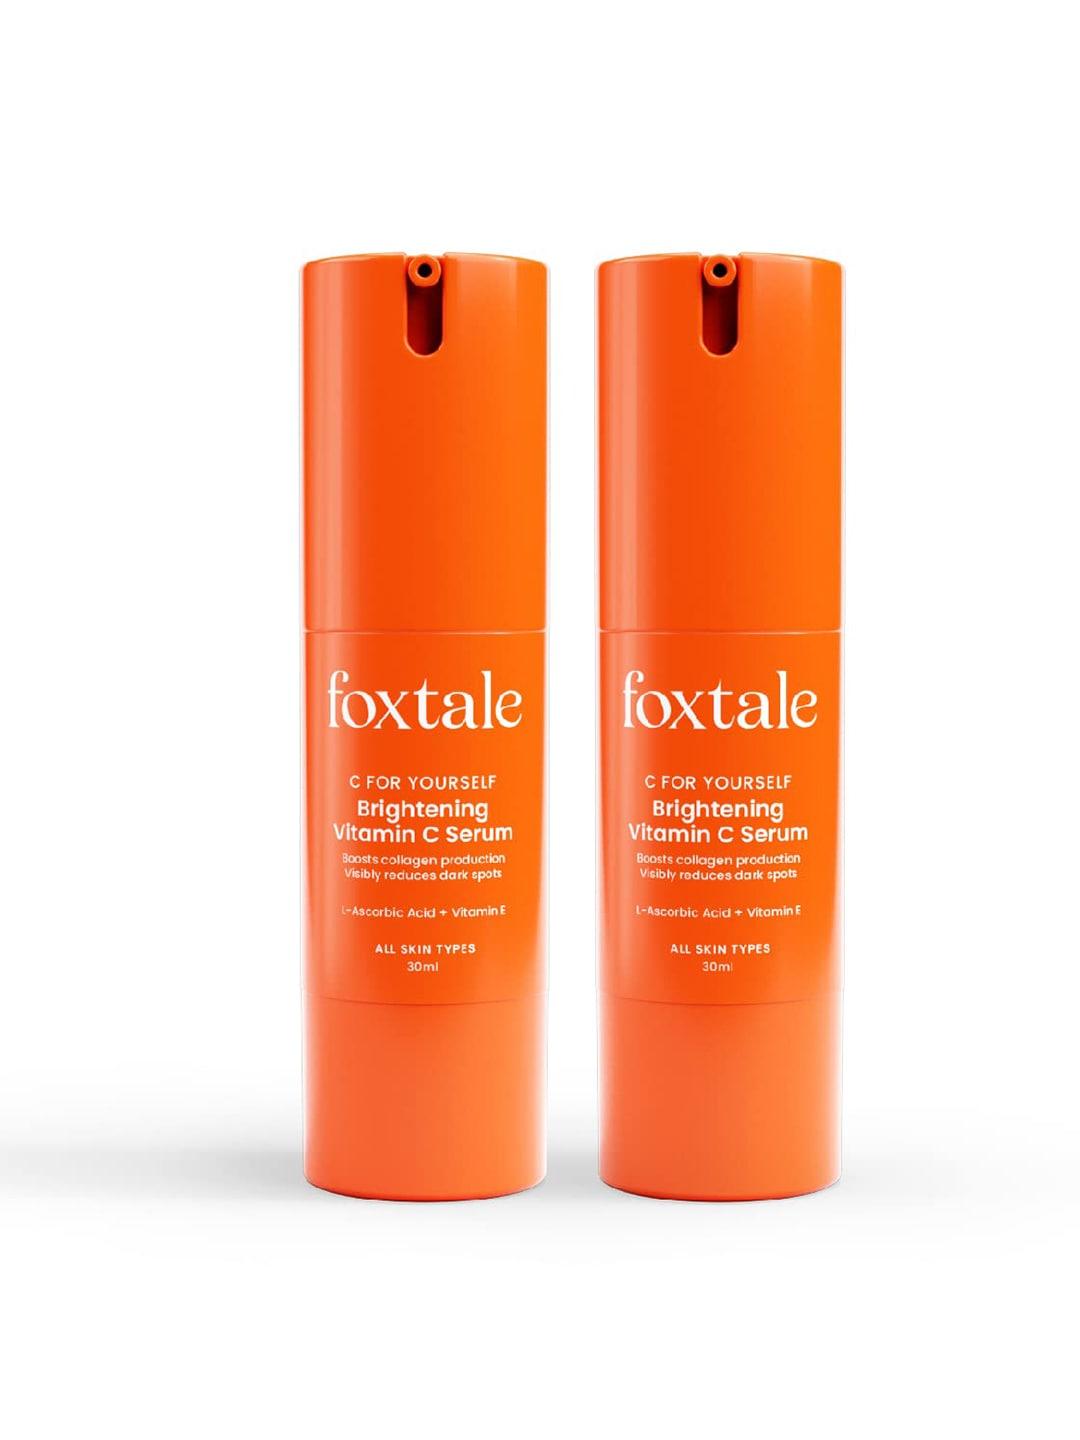 foxtale set of 2 c for yourself vitamin c face serum - 30 ml each